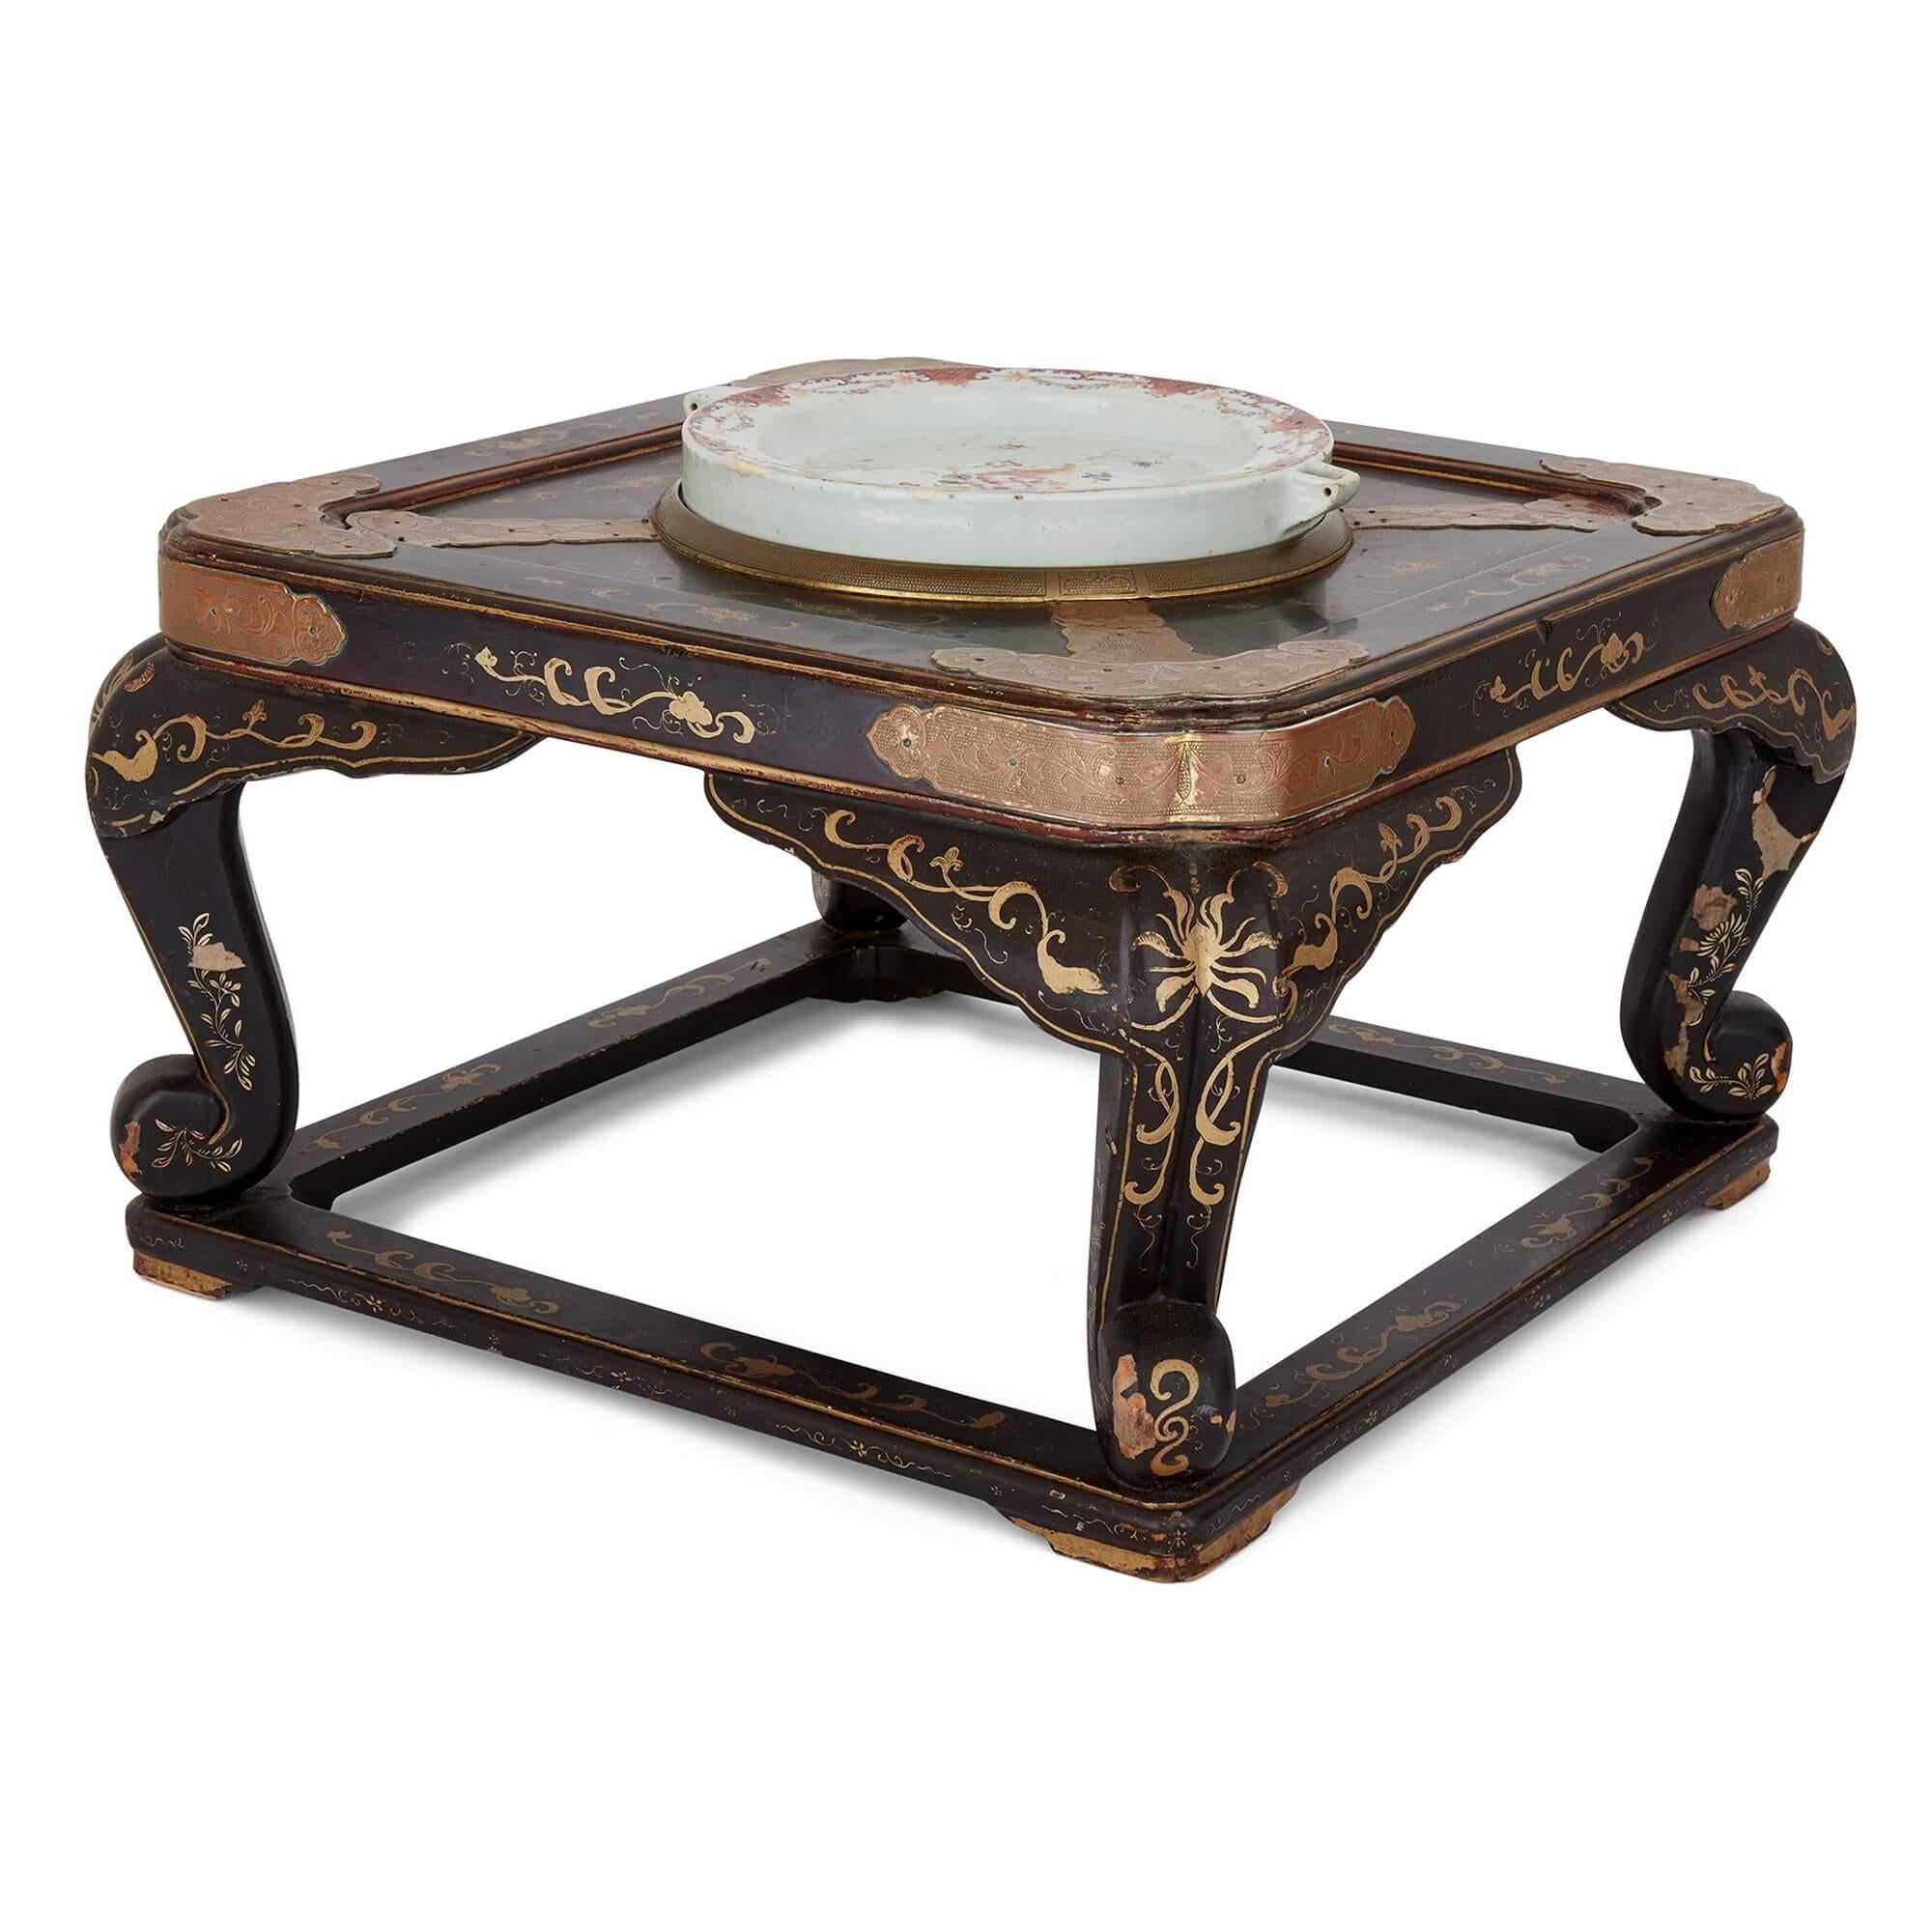 Gilt Pair of Antique Chinese Lacquered Low Tables with Porcelain Warming Plates For Sale